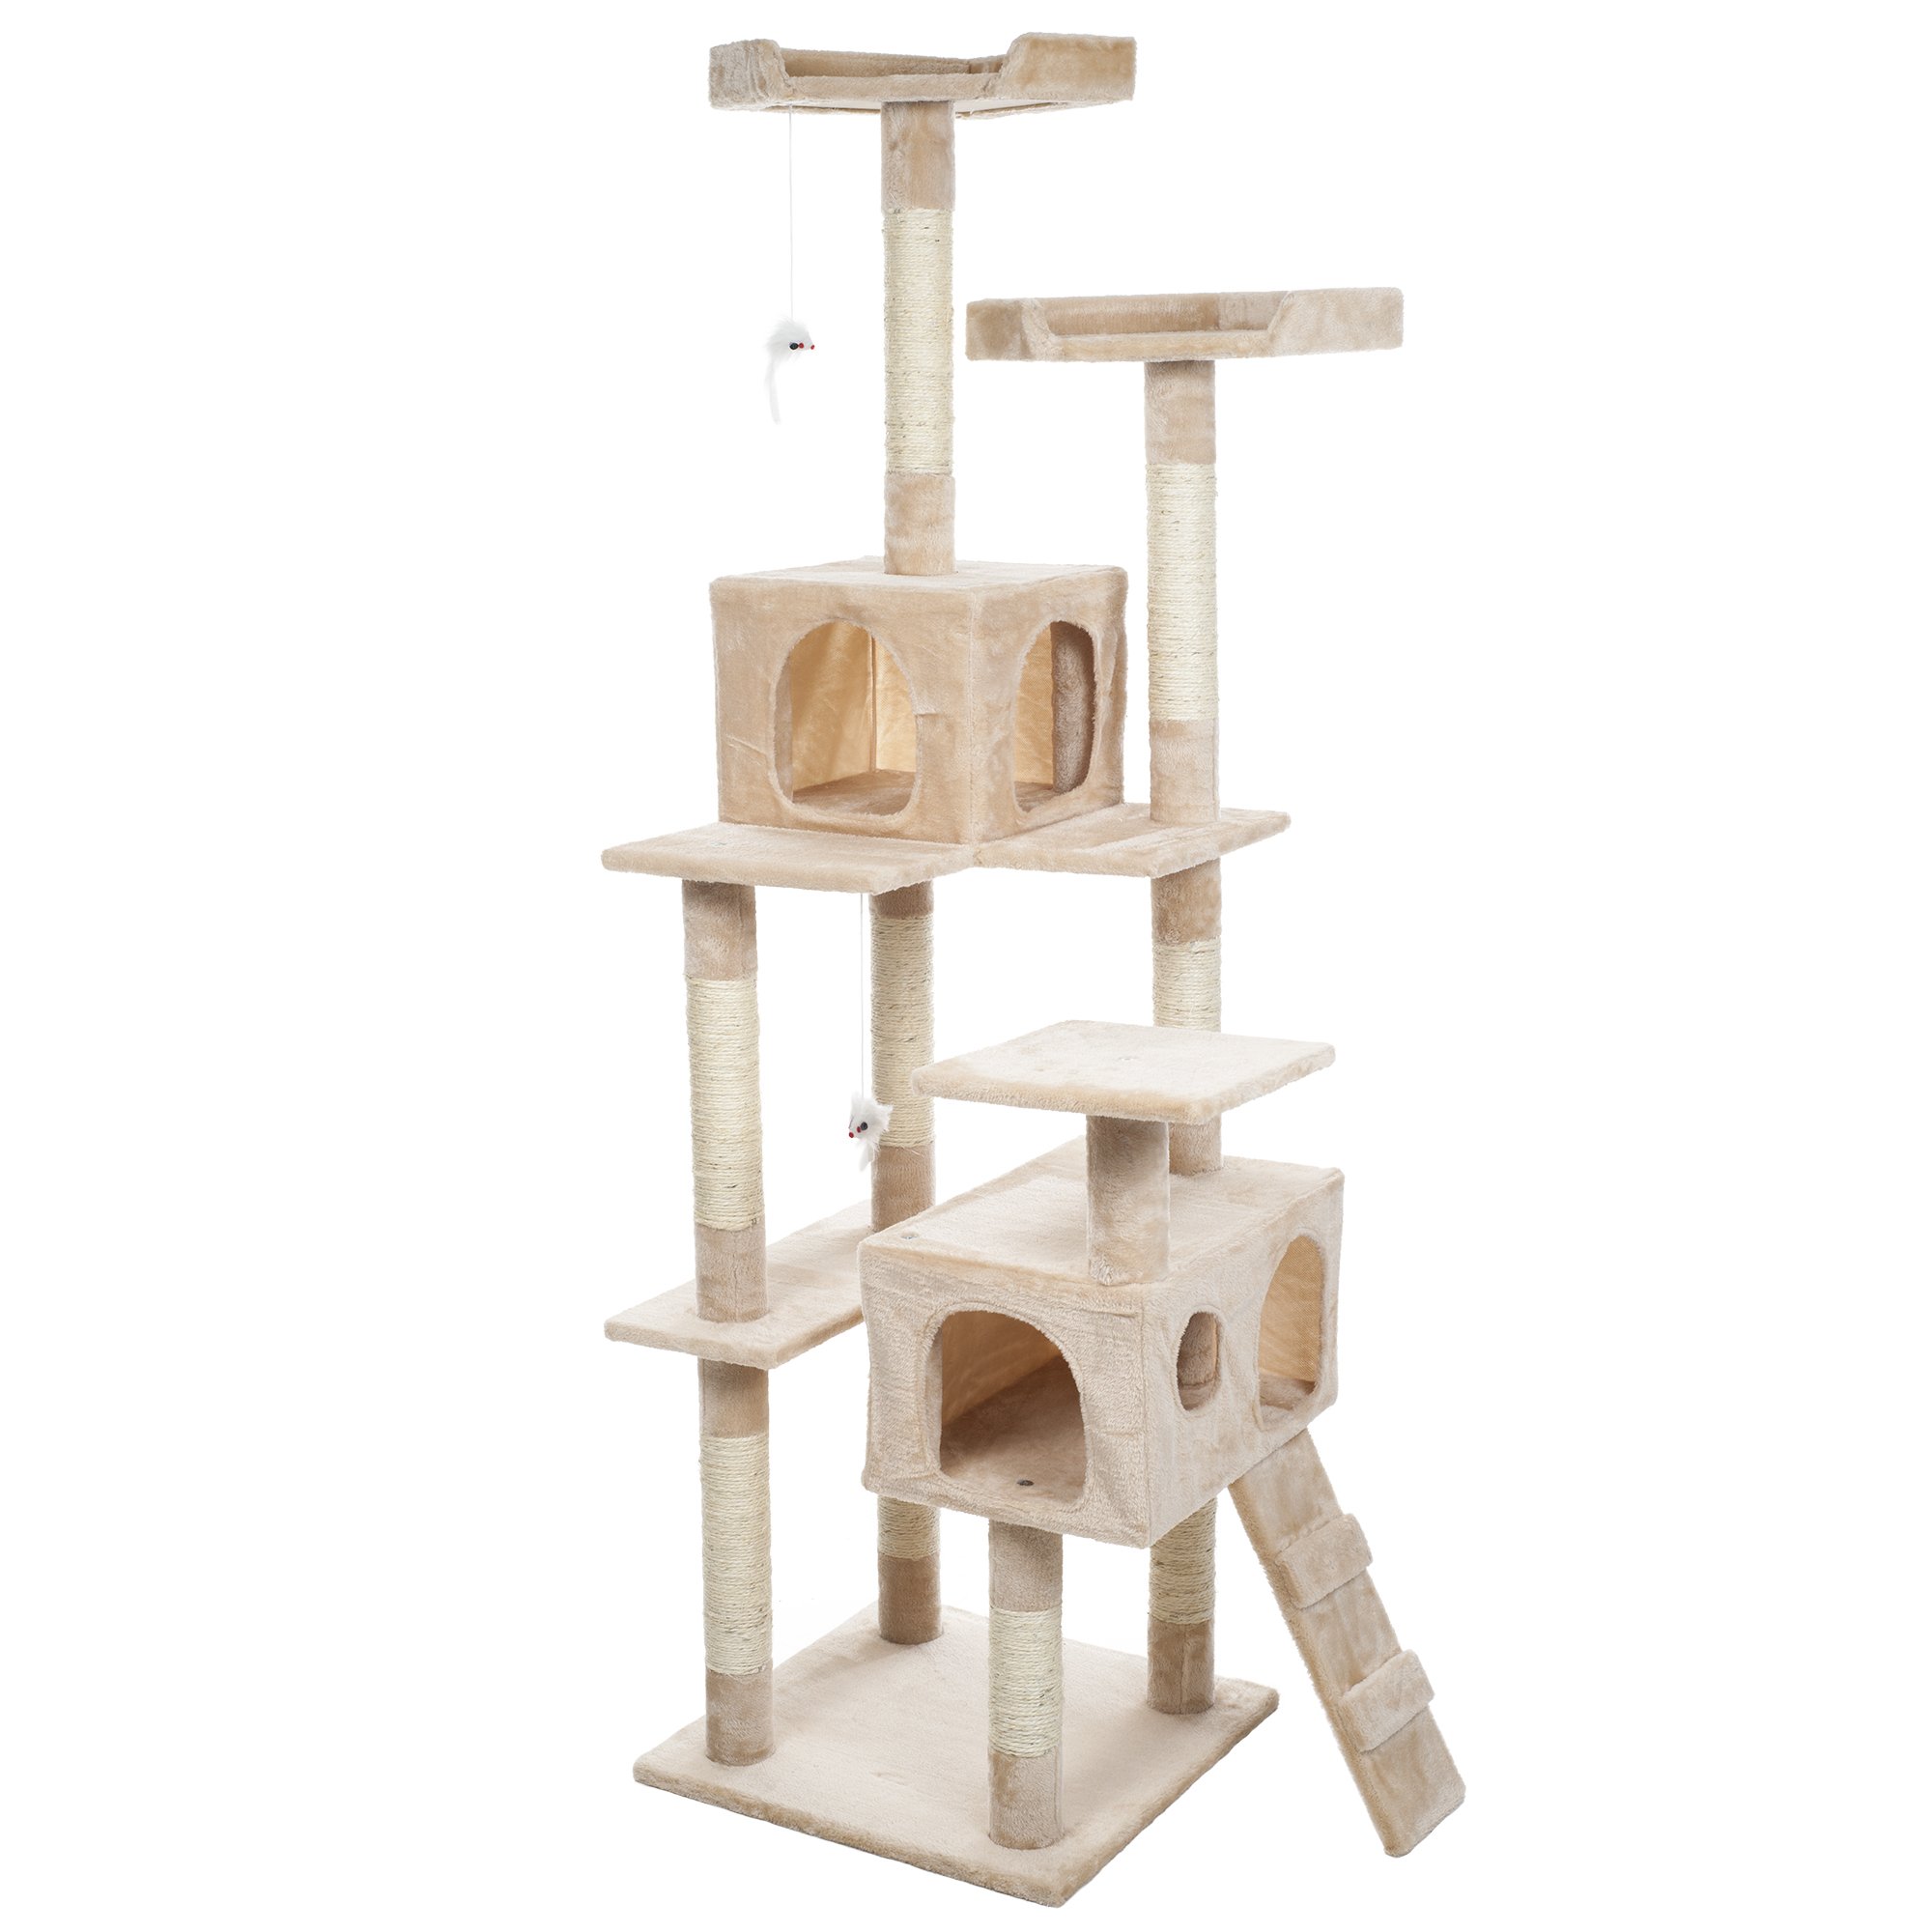 5.5-Ft Petmaker 8-Tier Cat Tower $39 + Free Shipping w/ Prime or on $35+